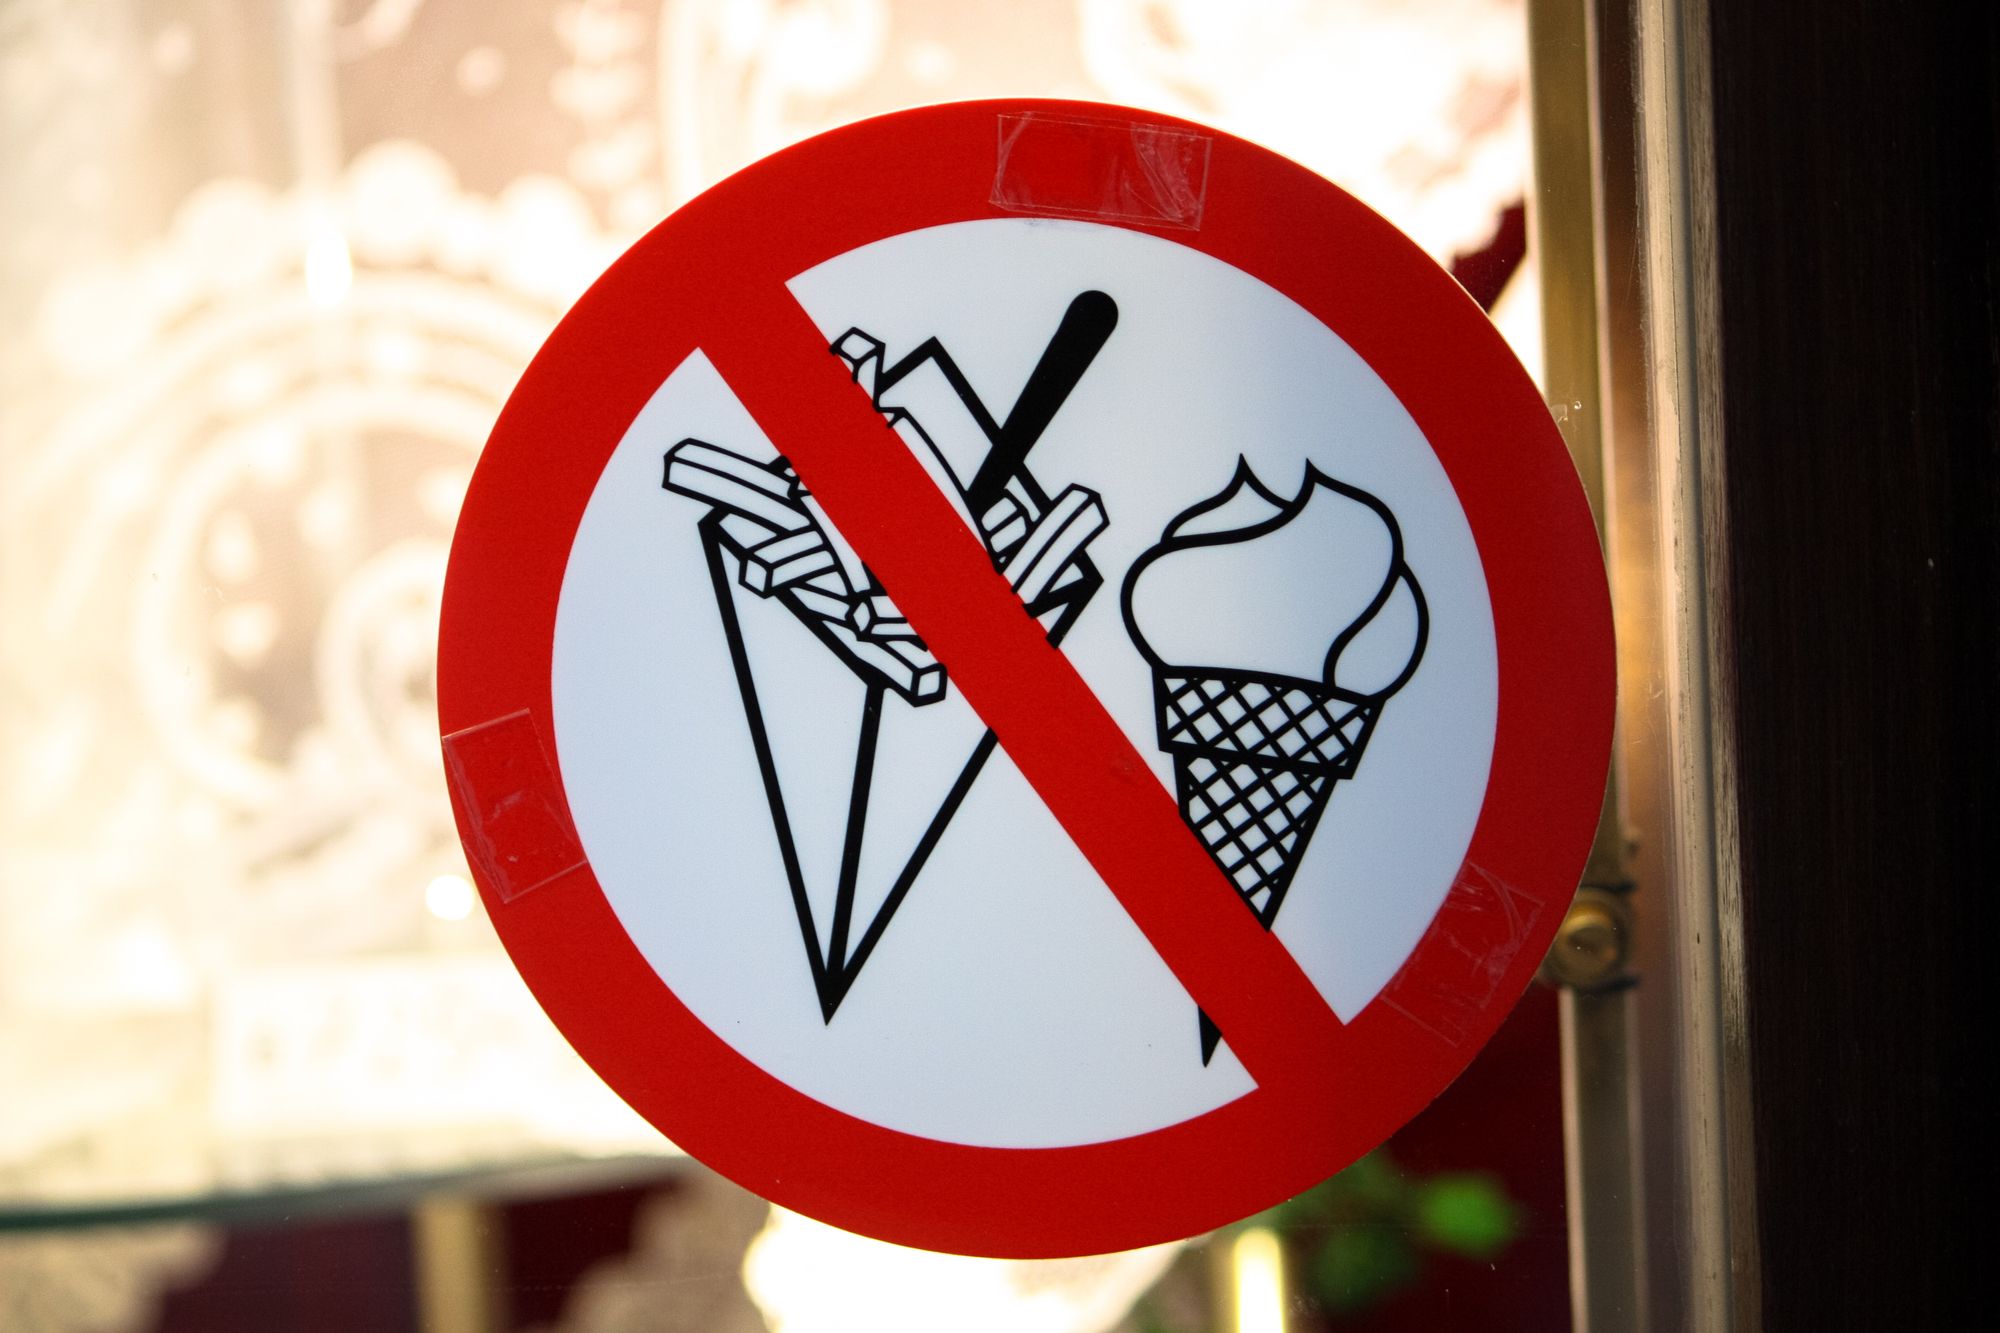 A red "banned" sign with ice cream and French fries